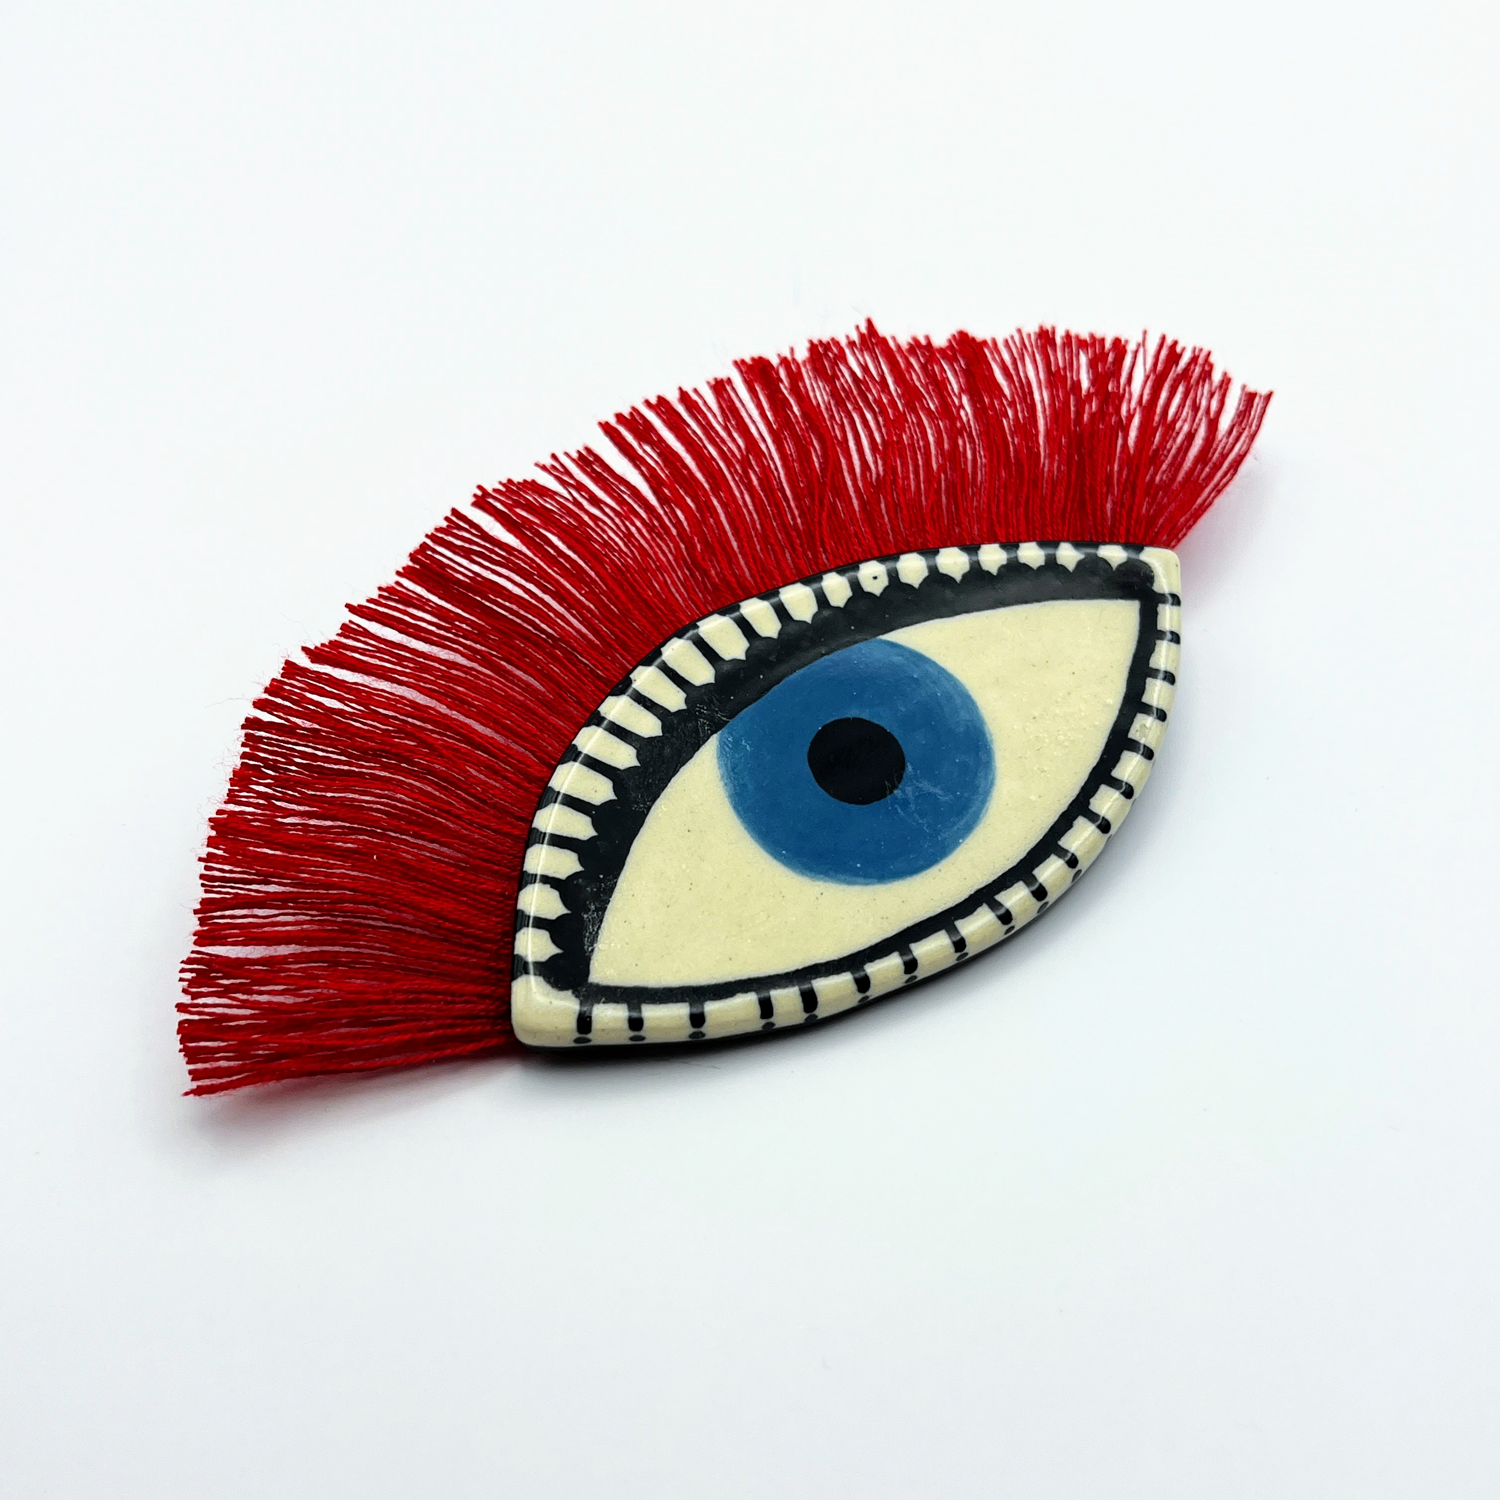 Here and Here: Blue Eye Brooch with Red Lashes Product Image 2 of 2